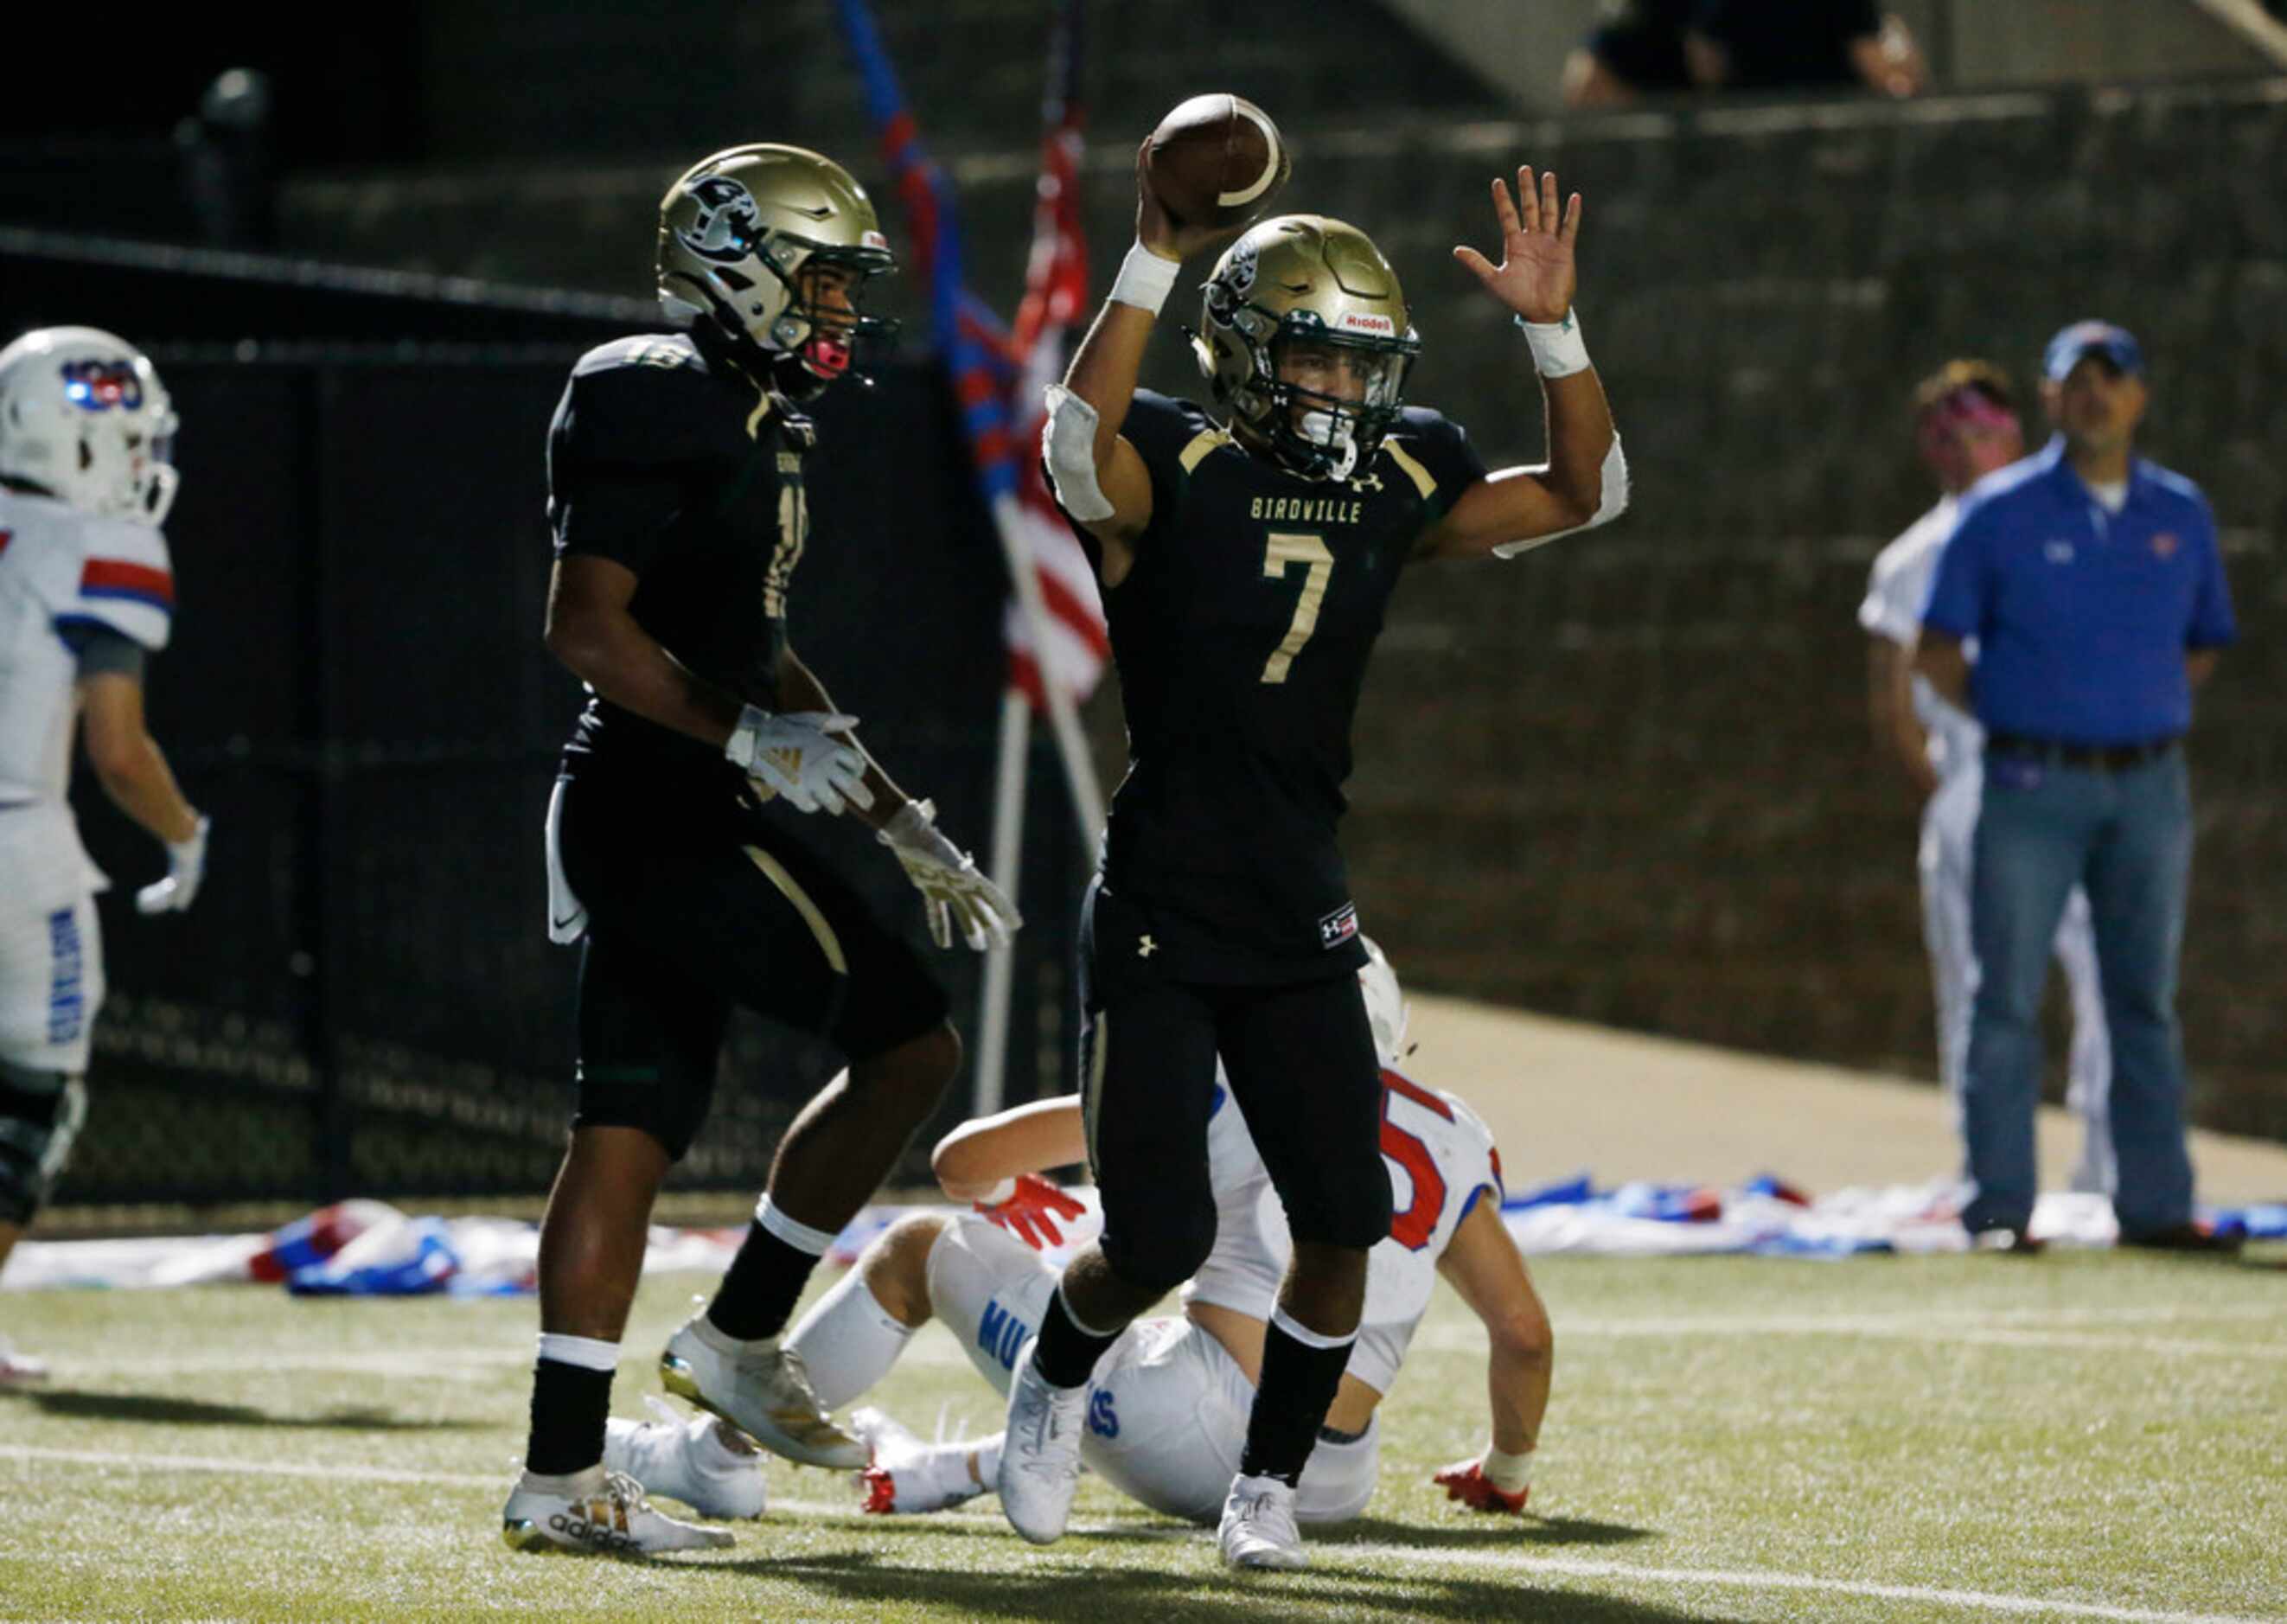 Birdville's Hosea Armstong (7) celebrates his receiving touchdown against Grapevine during...